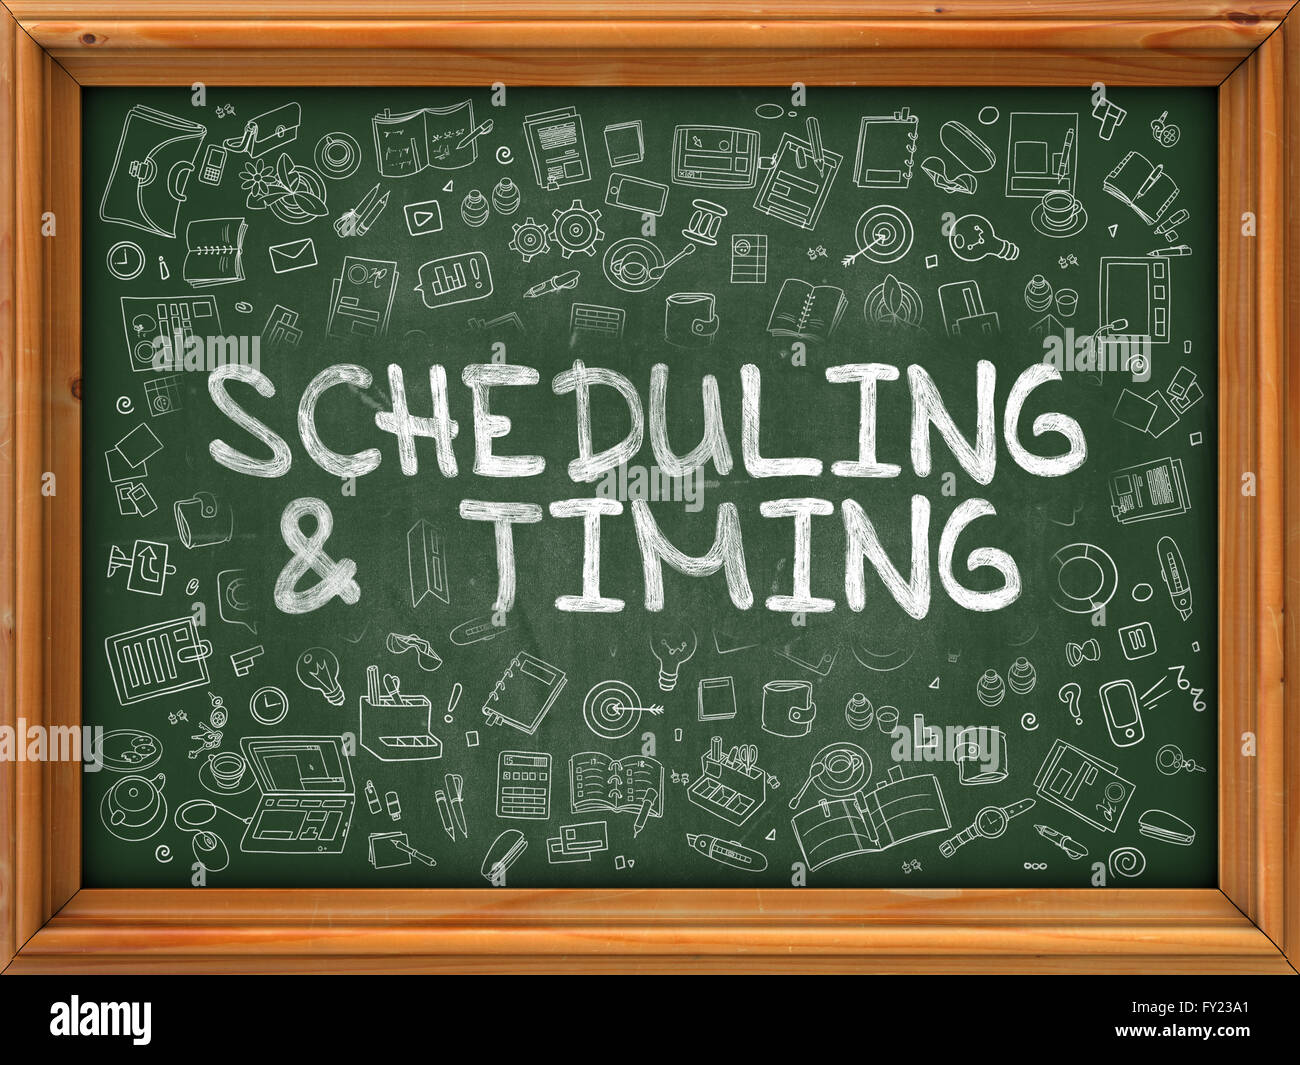 Green Chalkboard with Hand Drawn Scheduling and Timing. Stock Photo